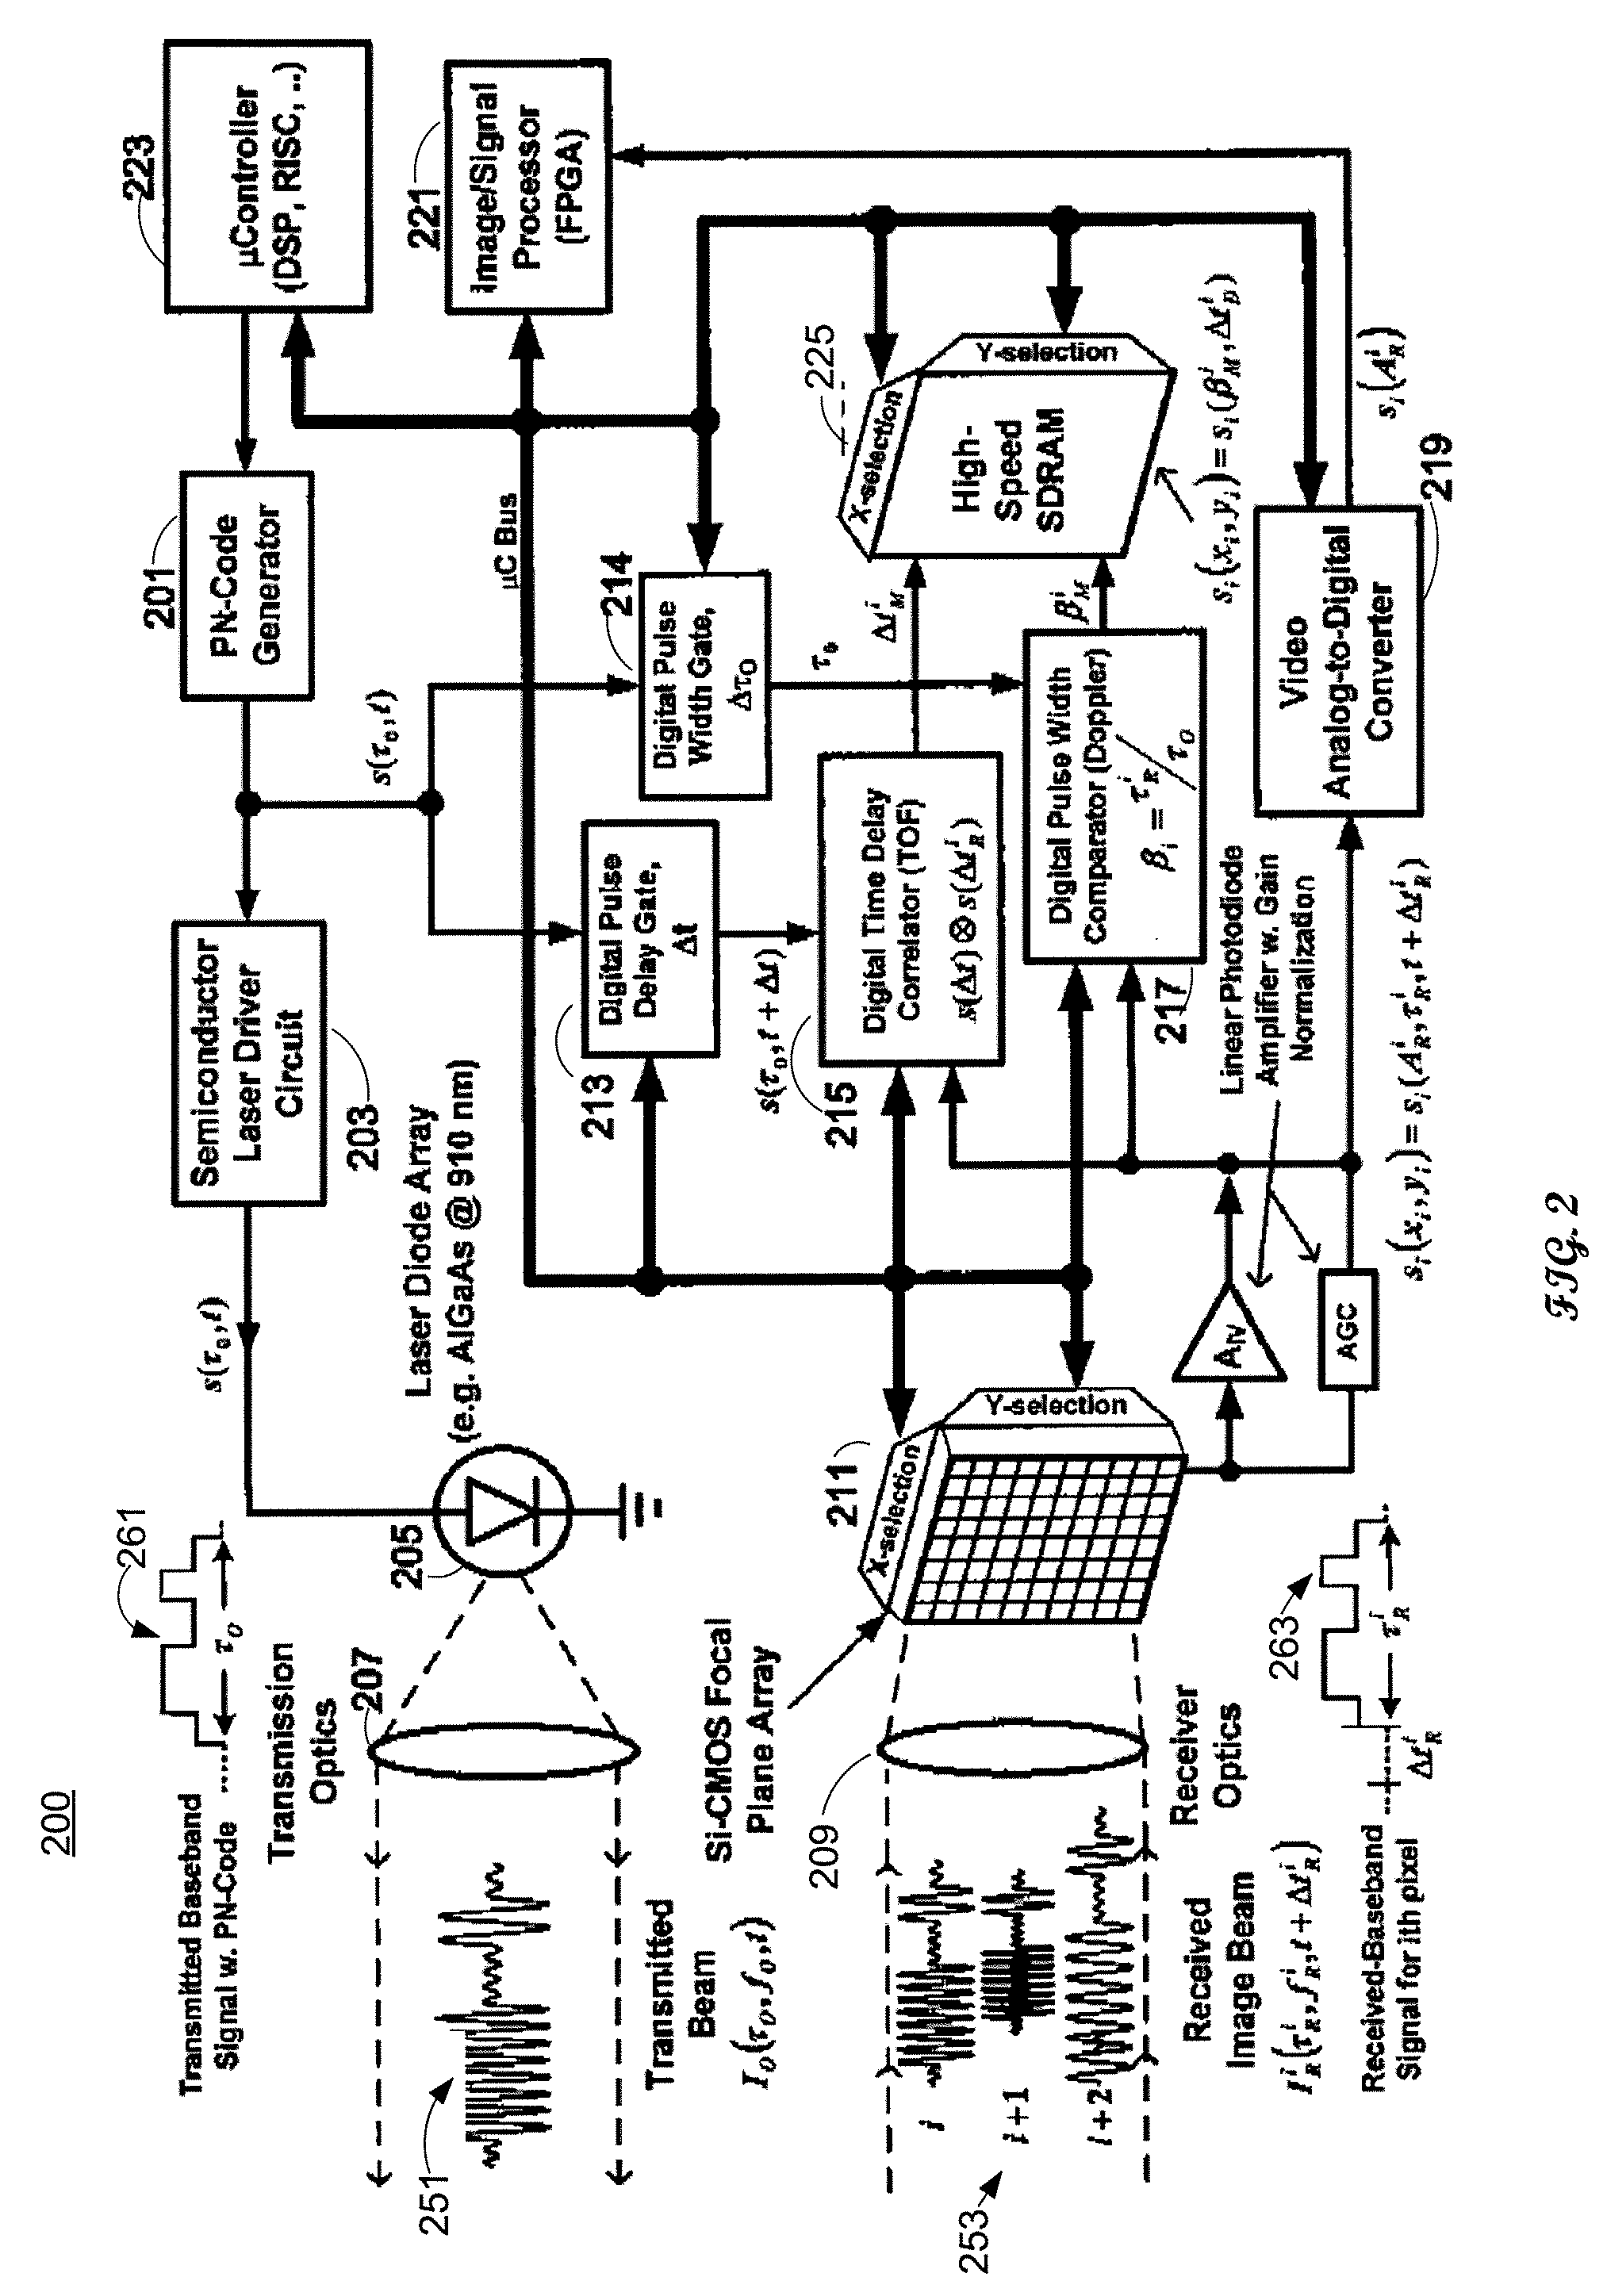 Full-Field Light Detection and Ranging Imaging System